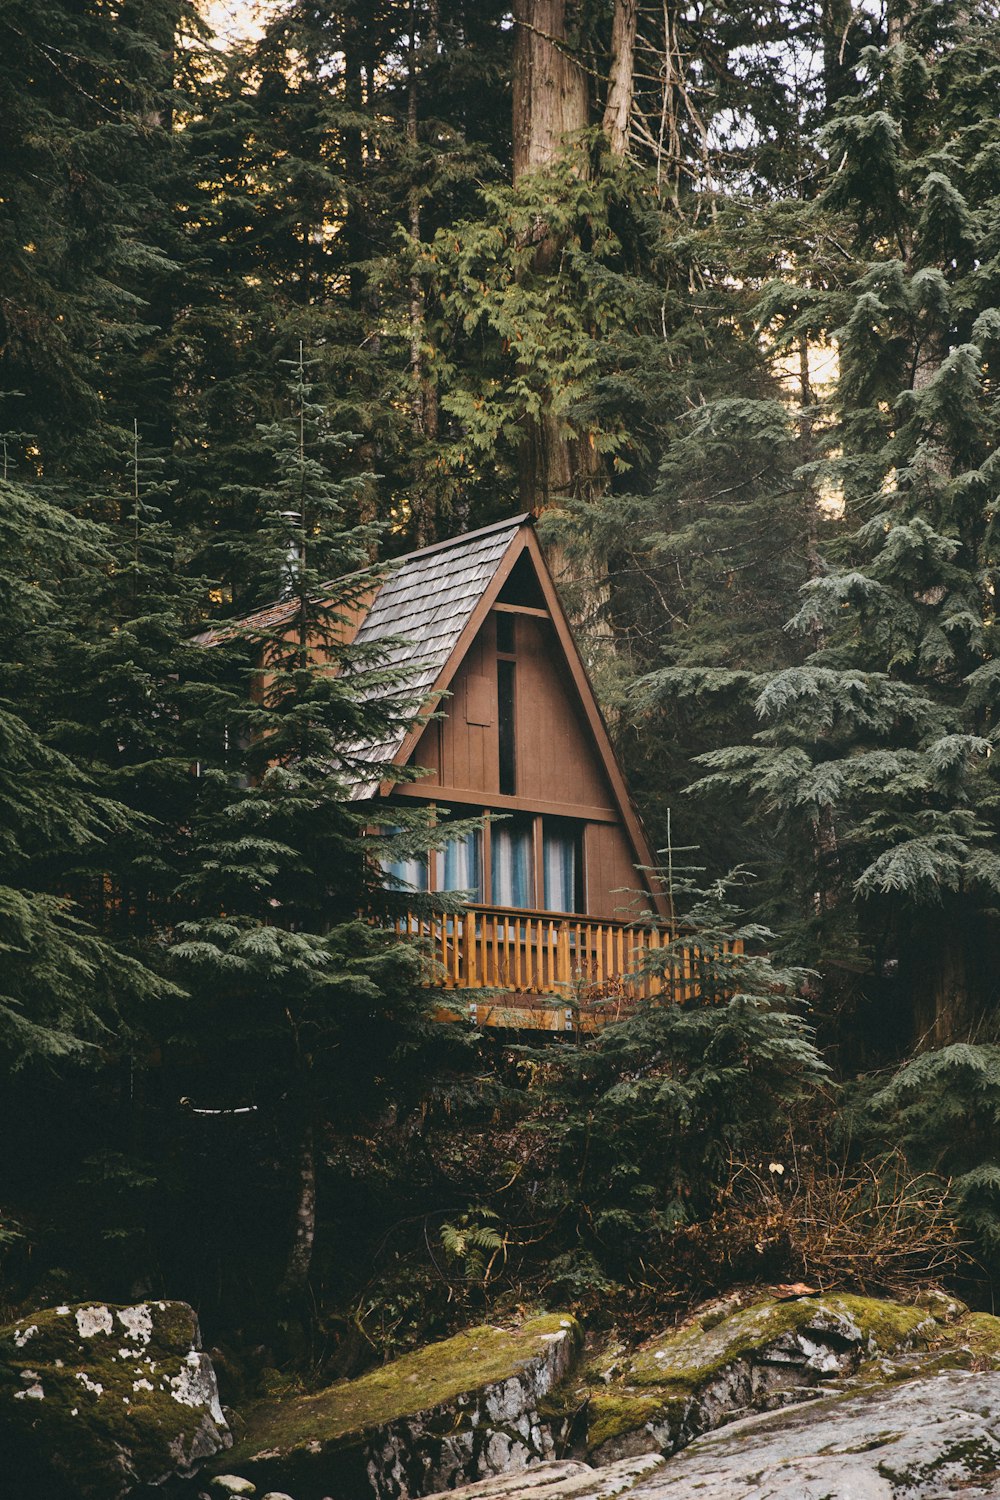 brown and grey wooden cabin surrounded by trees